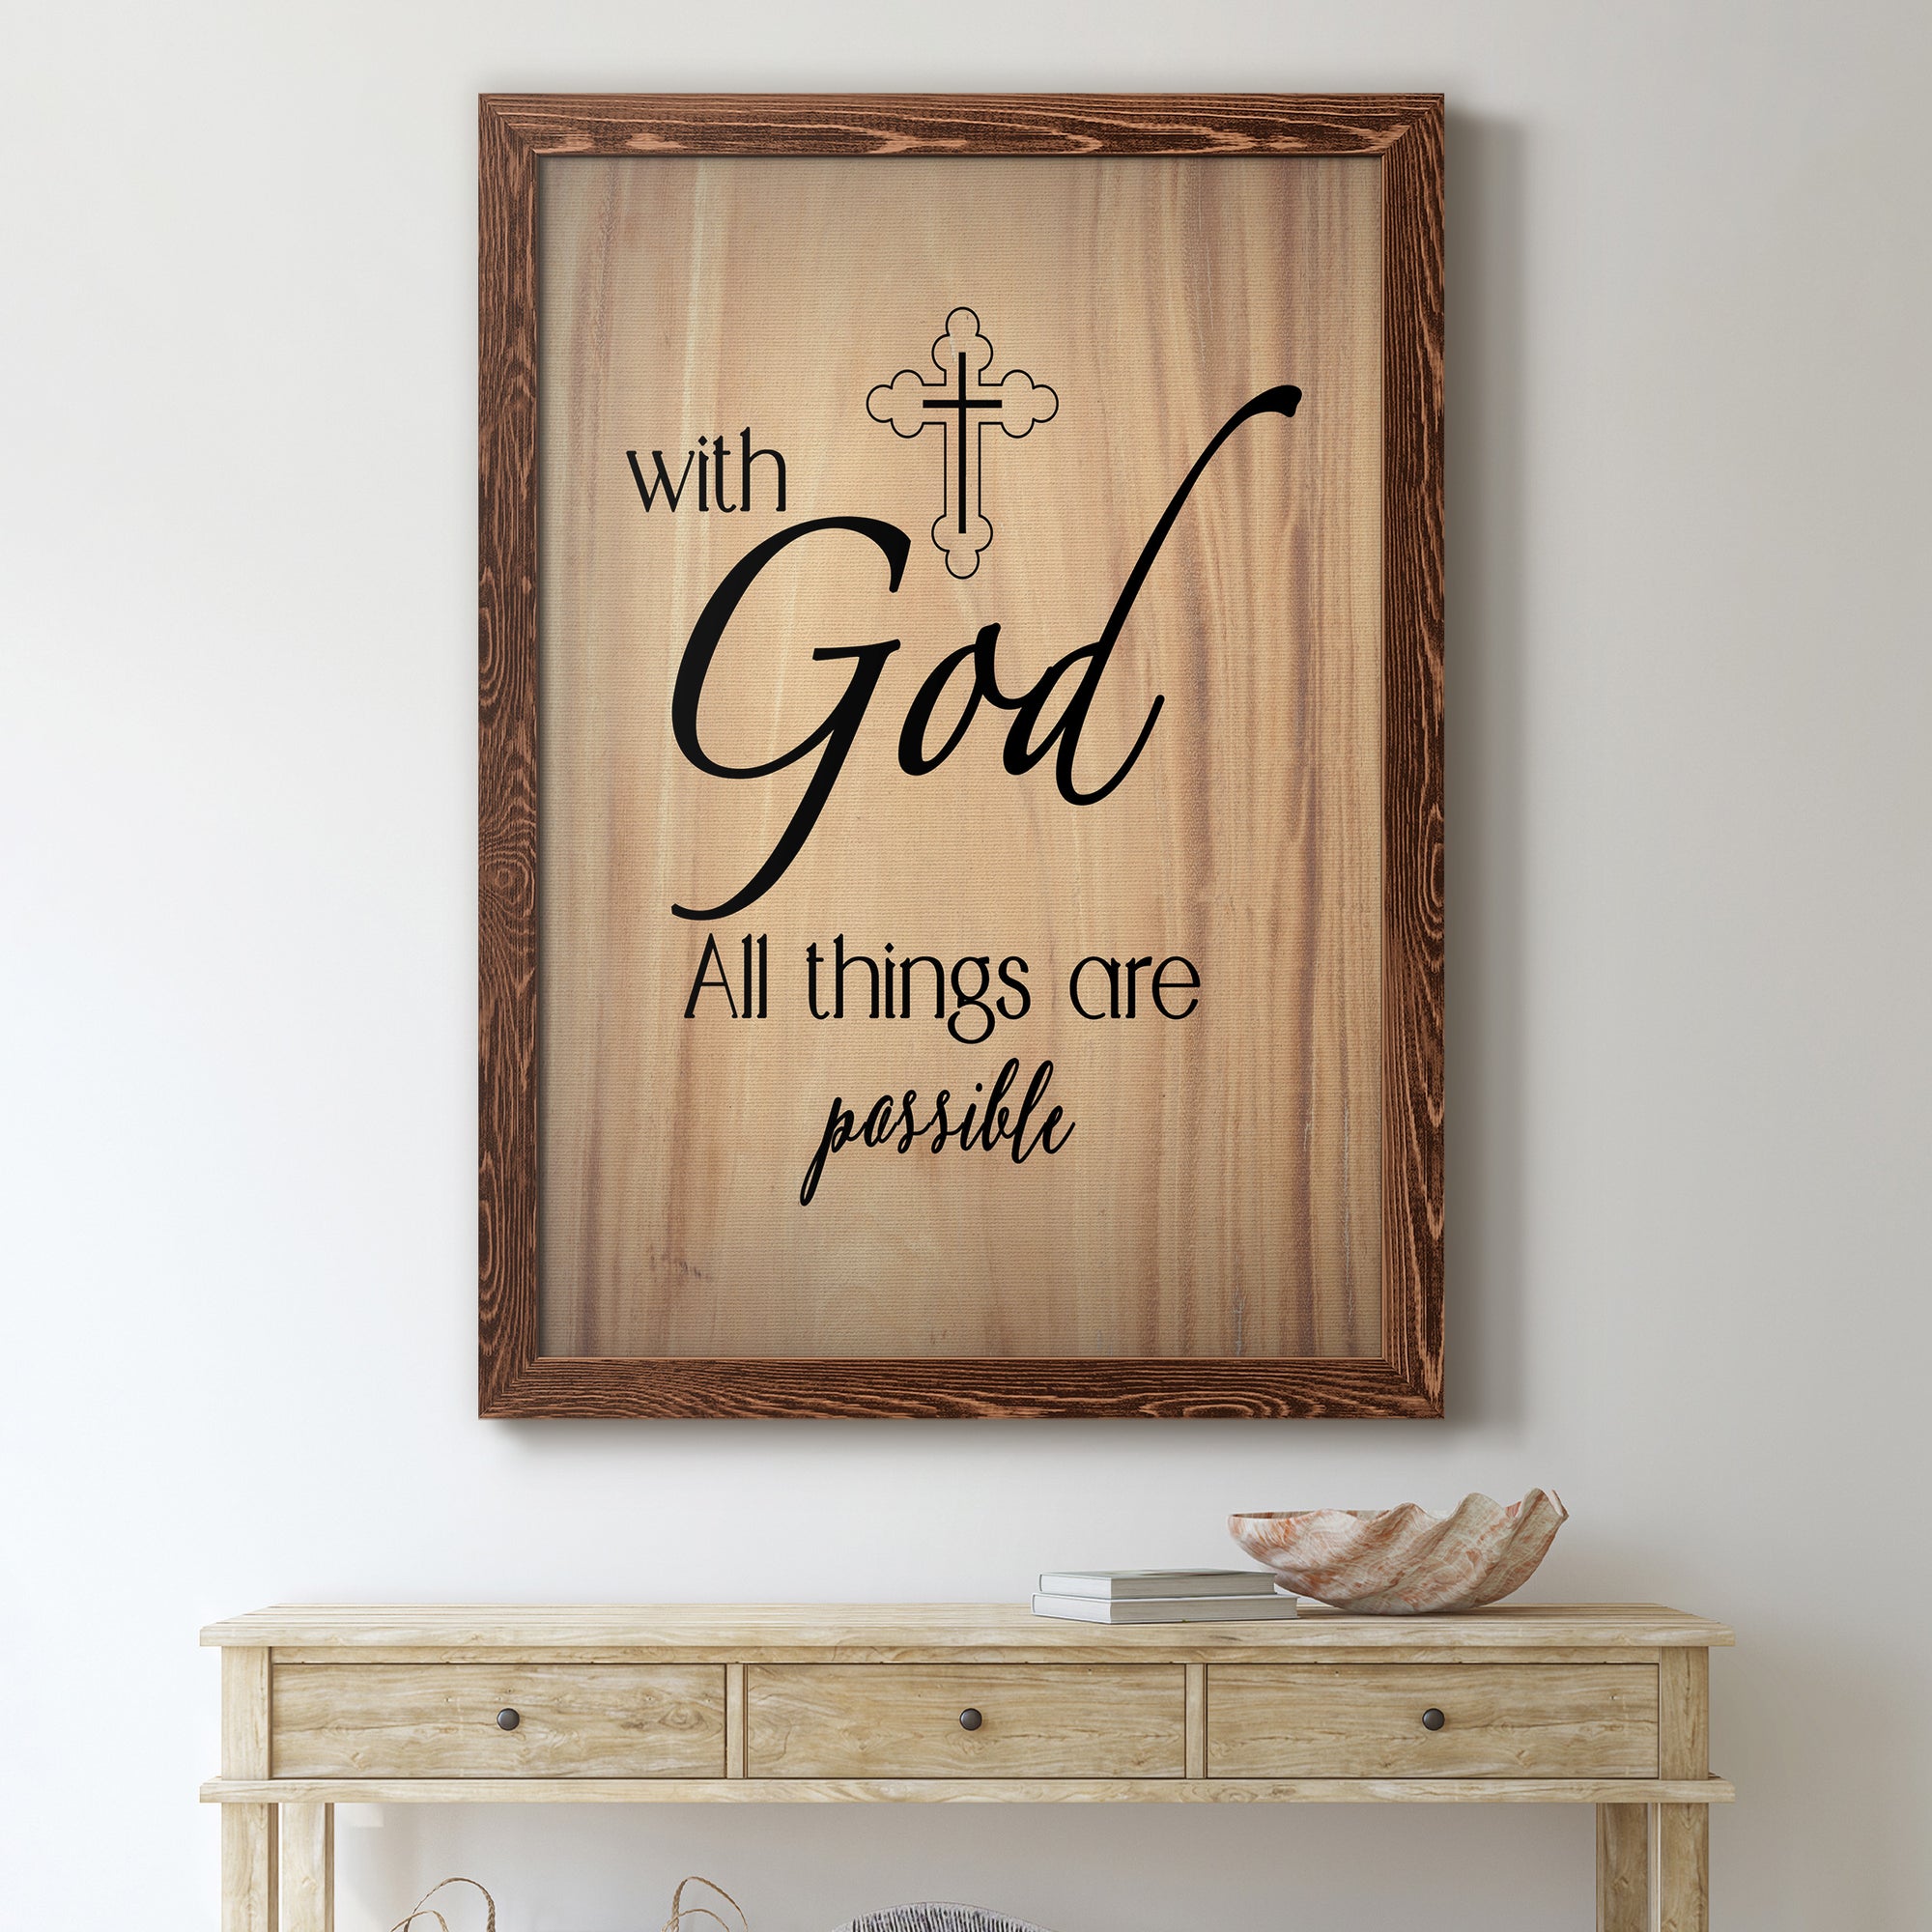 All Things Possible - Premium Canvas Framed in Barnwood - Ready to Hang